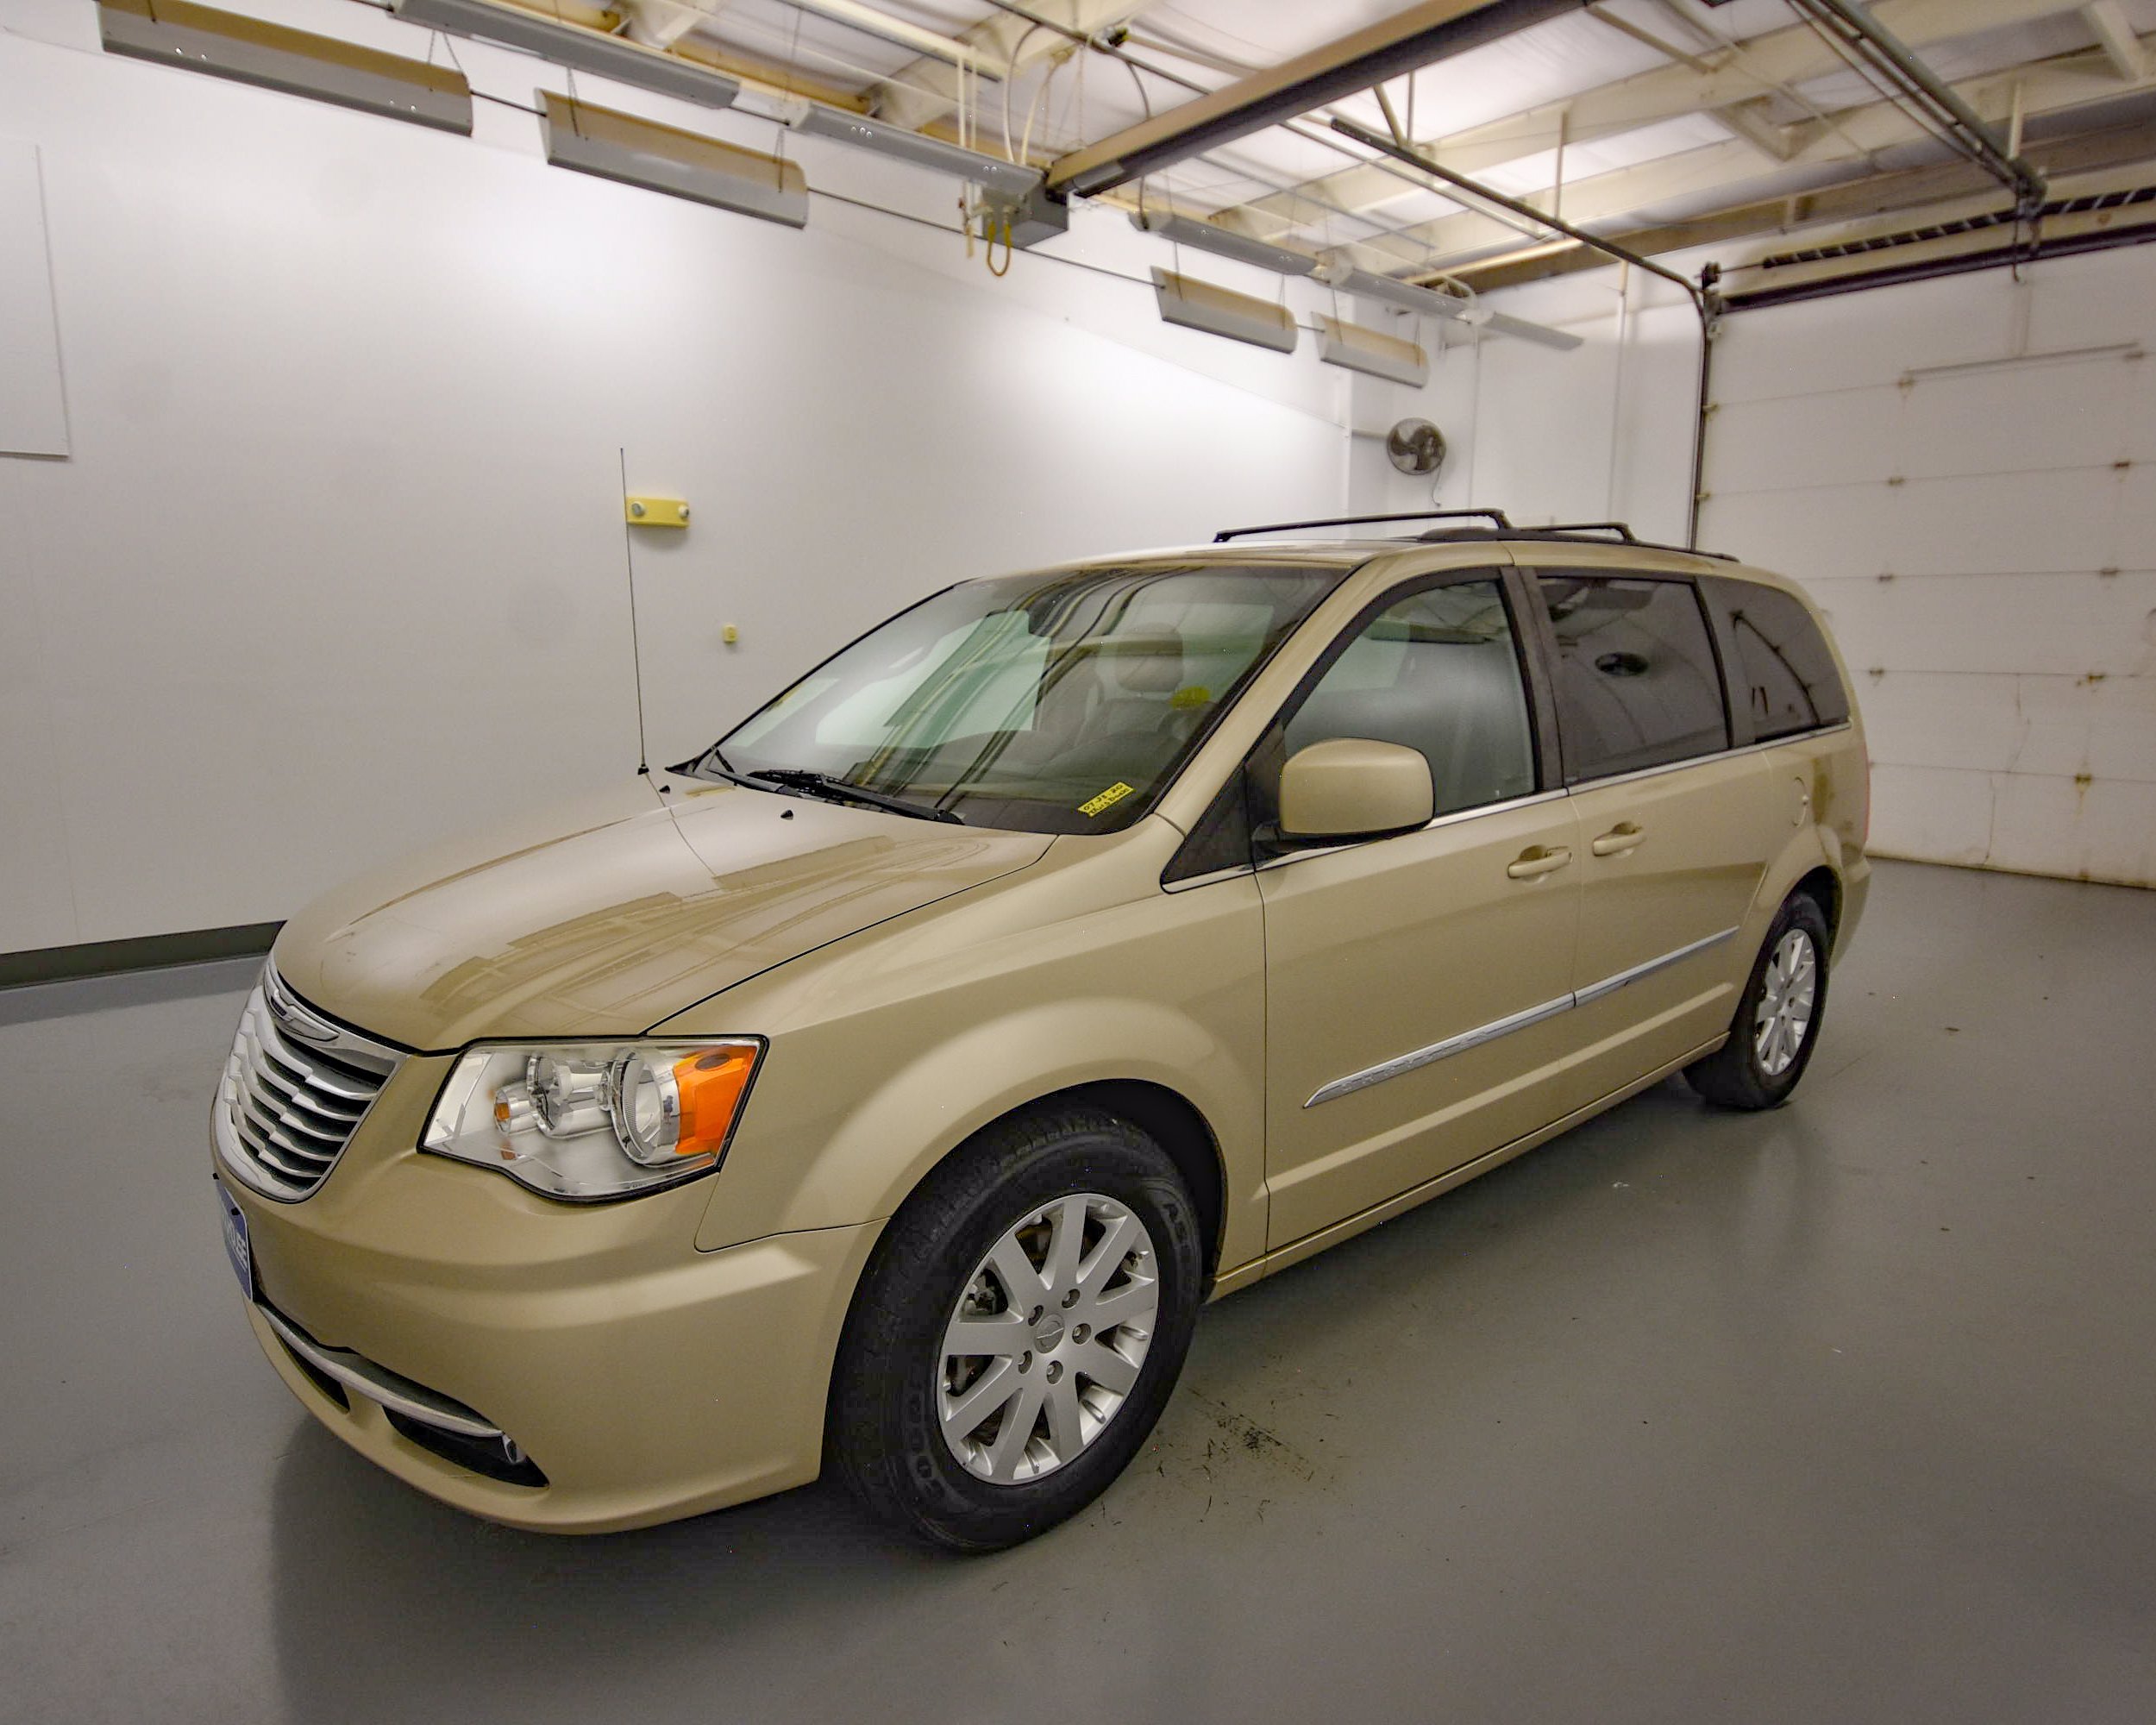 PreOwned 2013 Chrysler Town & Country Touring FWD Mini